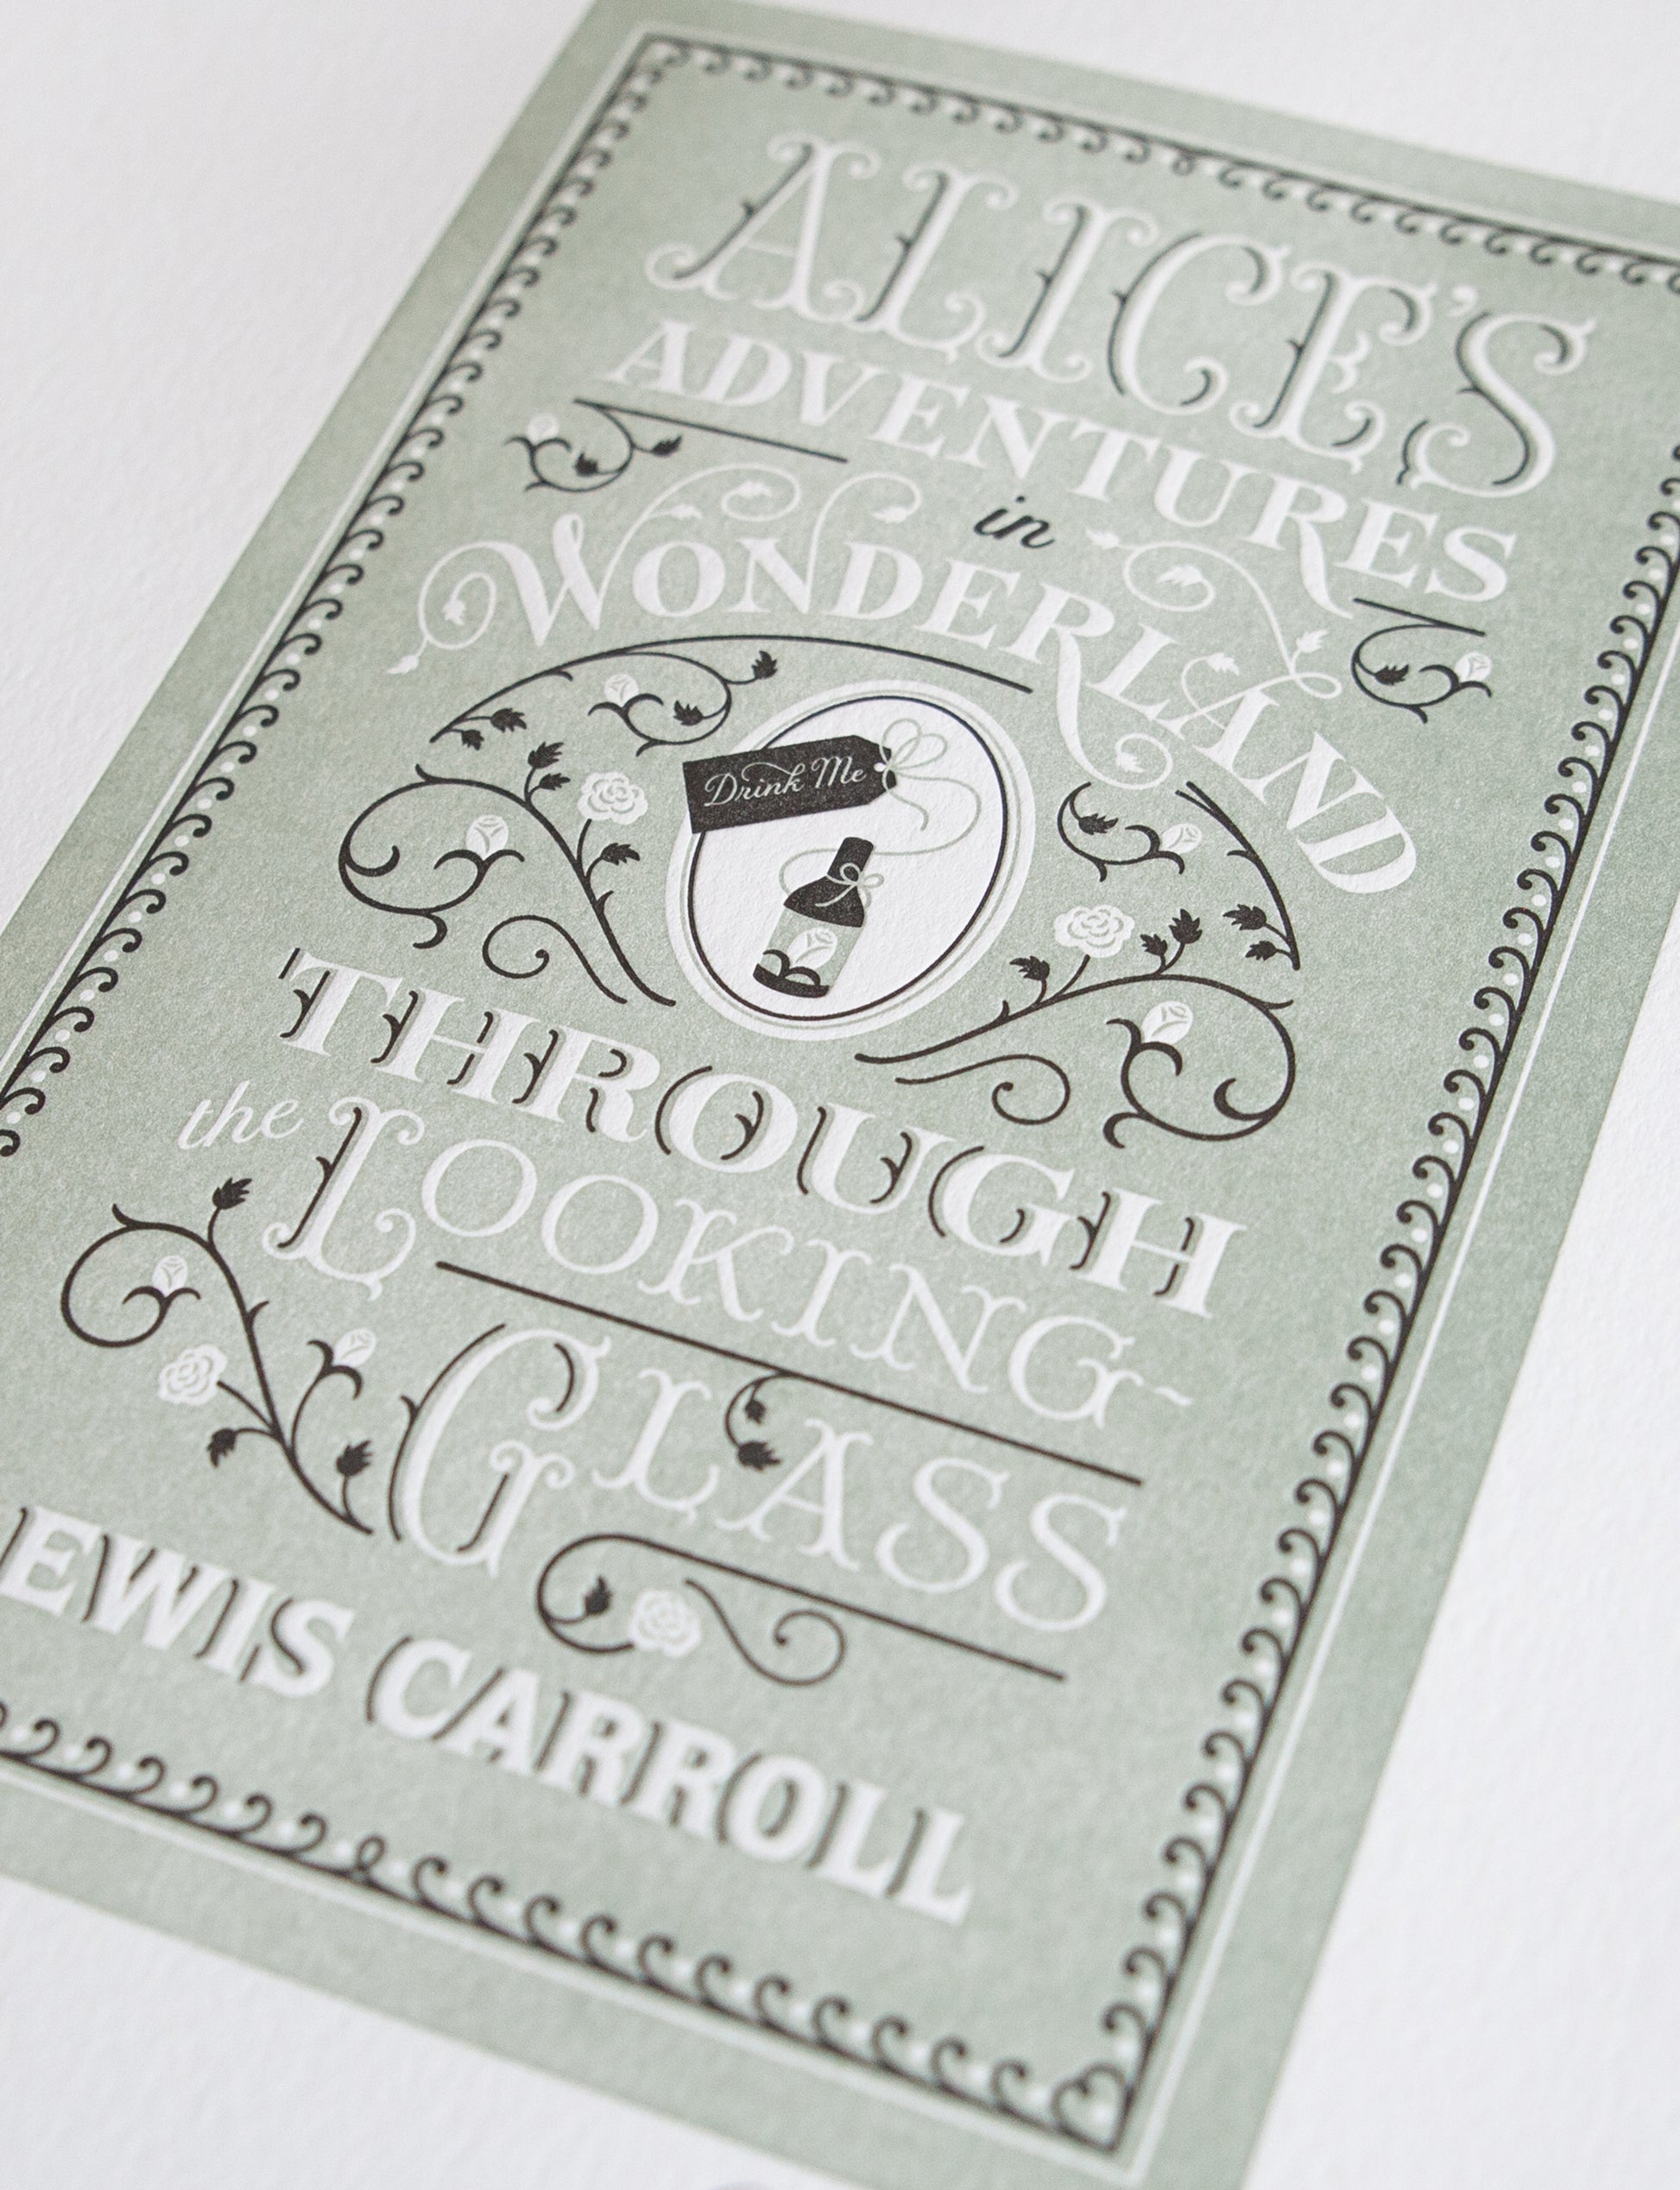 Close-up of a 2-color letterpress print in green and black. Printed artwork is an illustrated book cover of Alice's Adventures in Wonderland including custom hand-lettering.